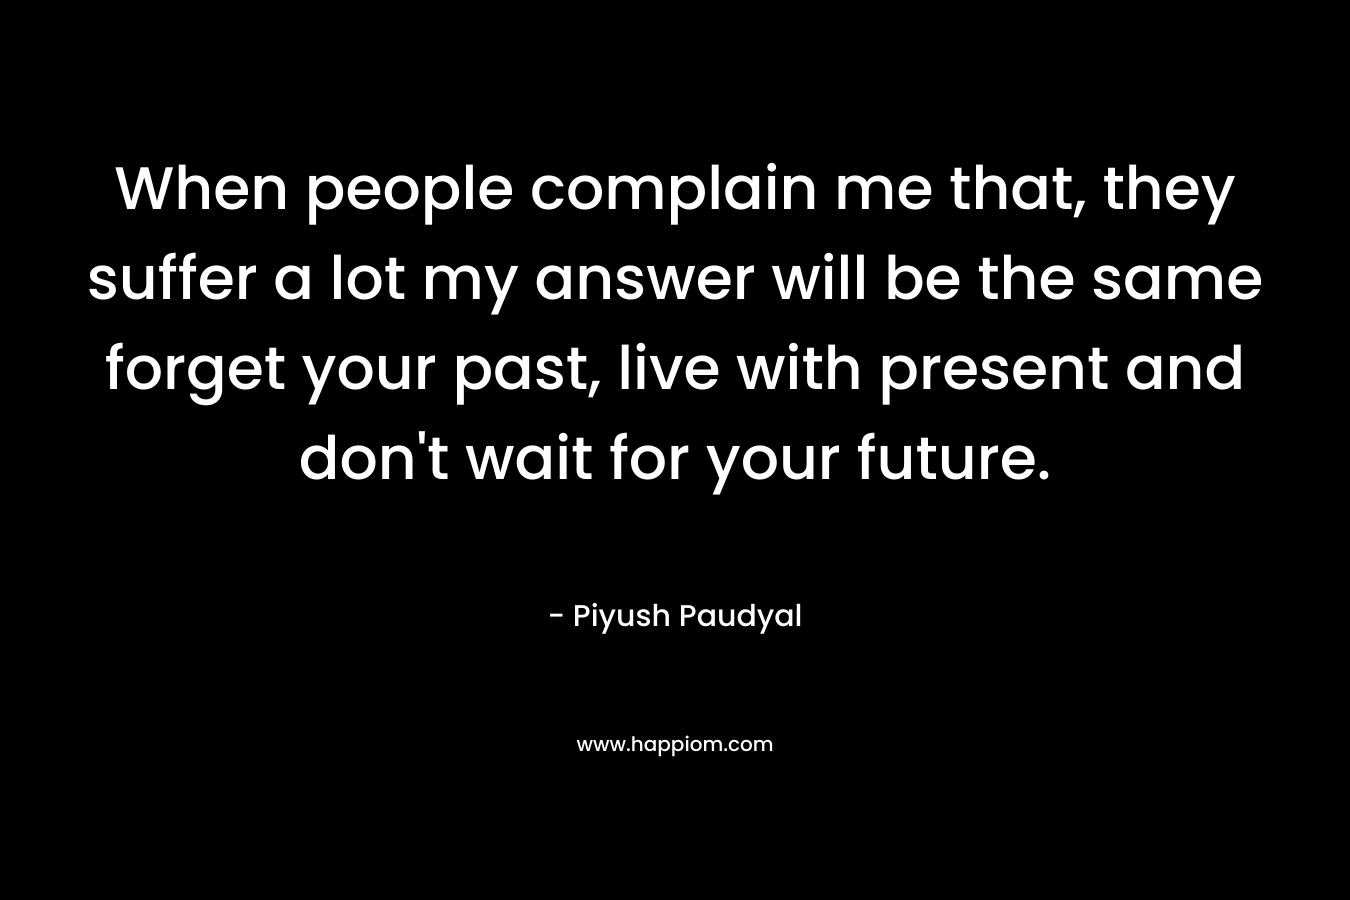 When people complain me that, they suffer a lot my answer will be the same forget your past, live with present and don’t wait for your future. – Piyush Paudyal